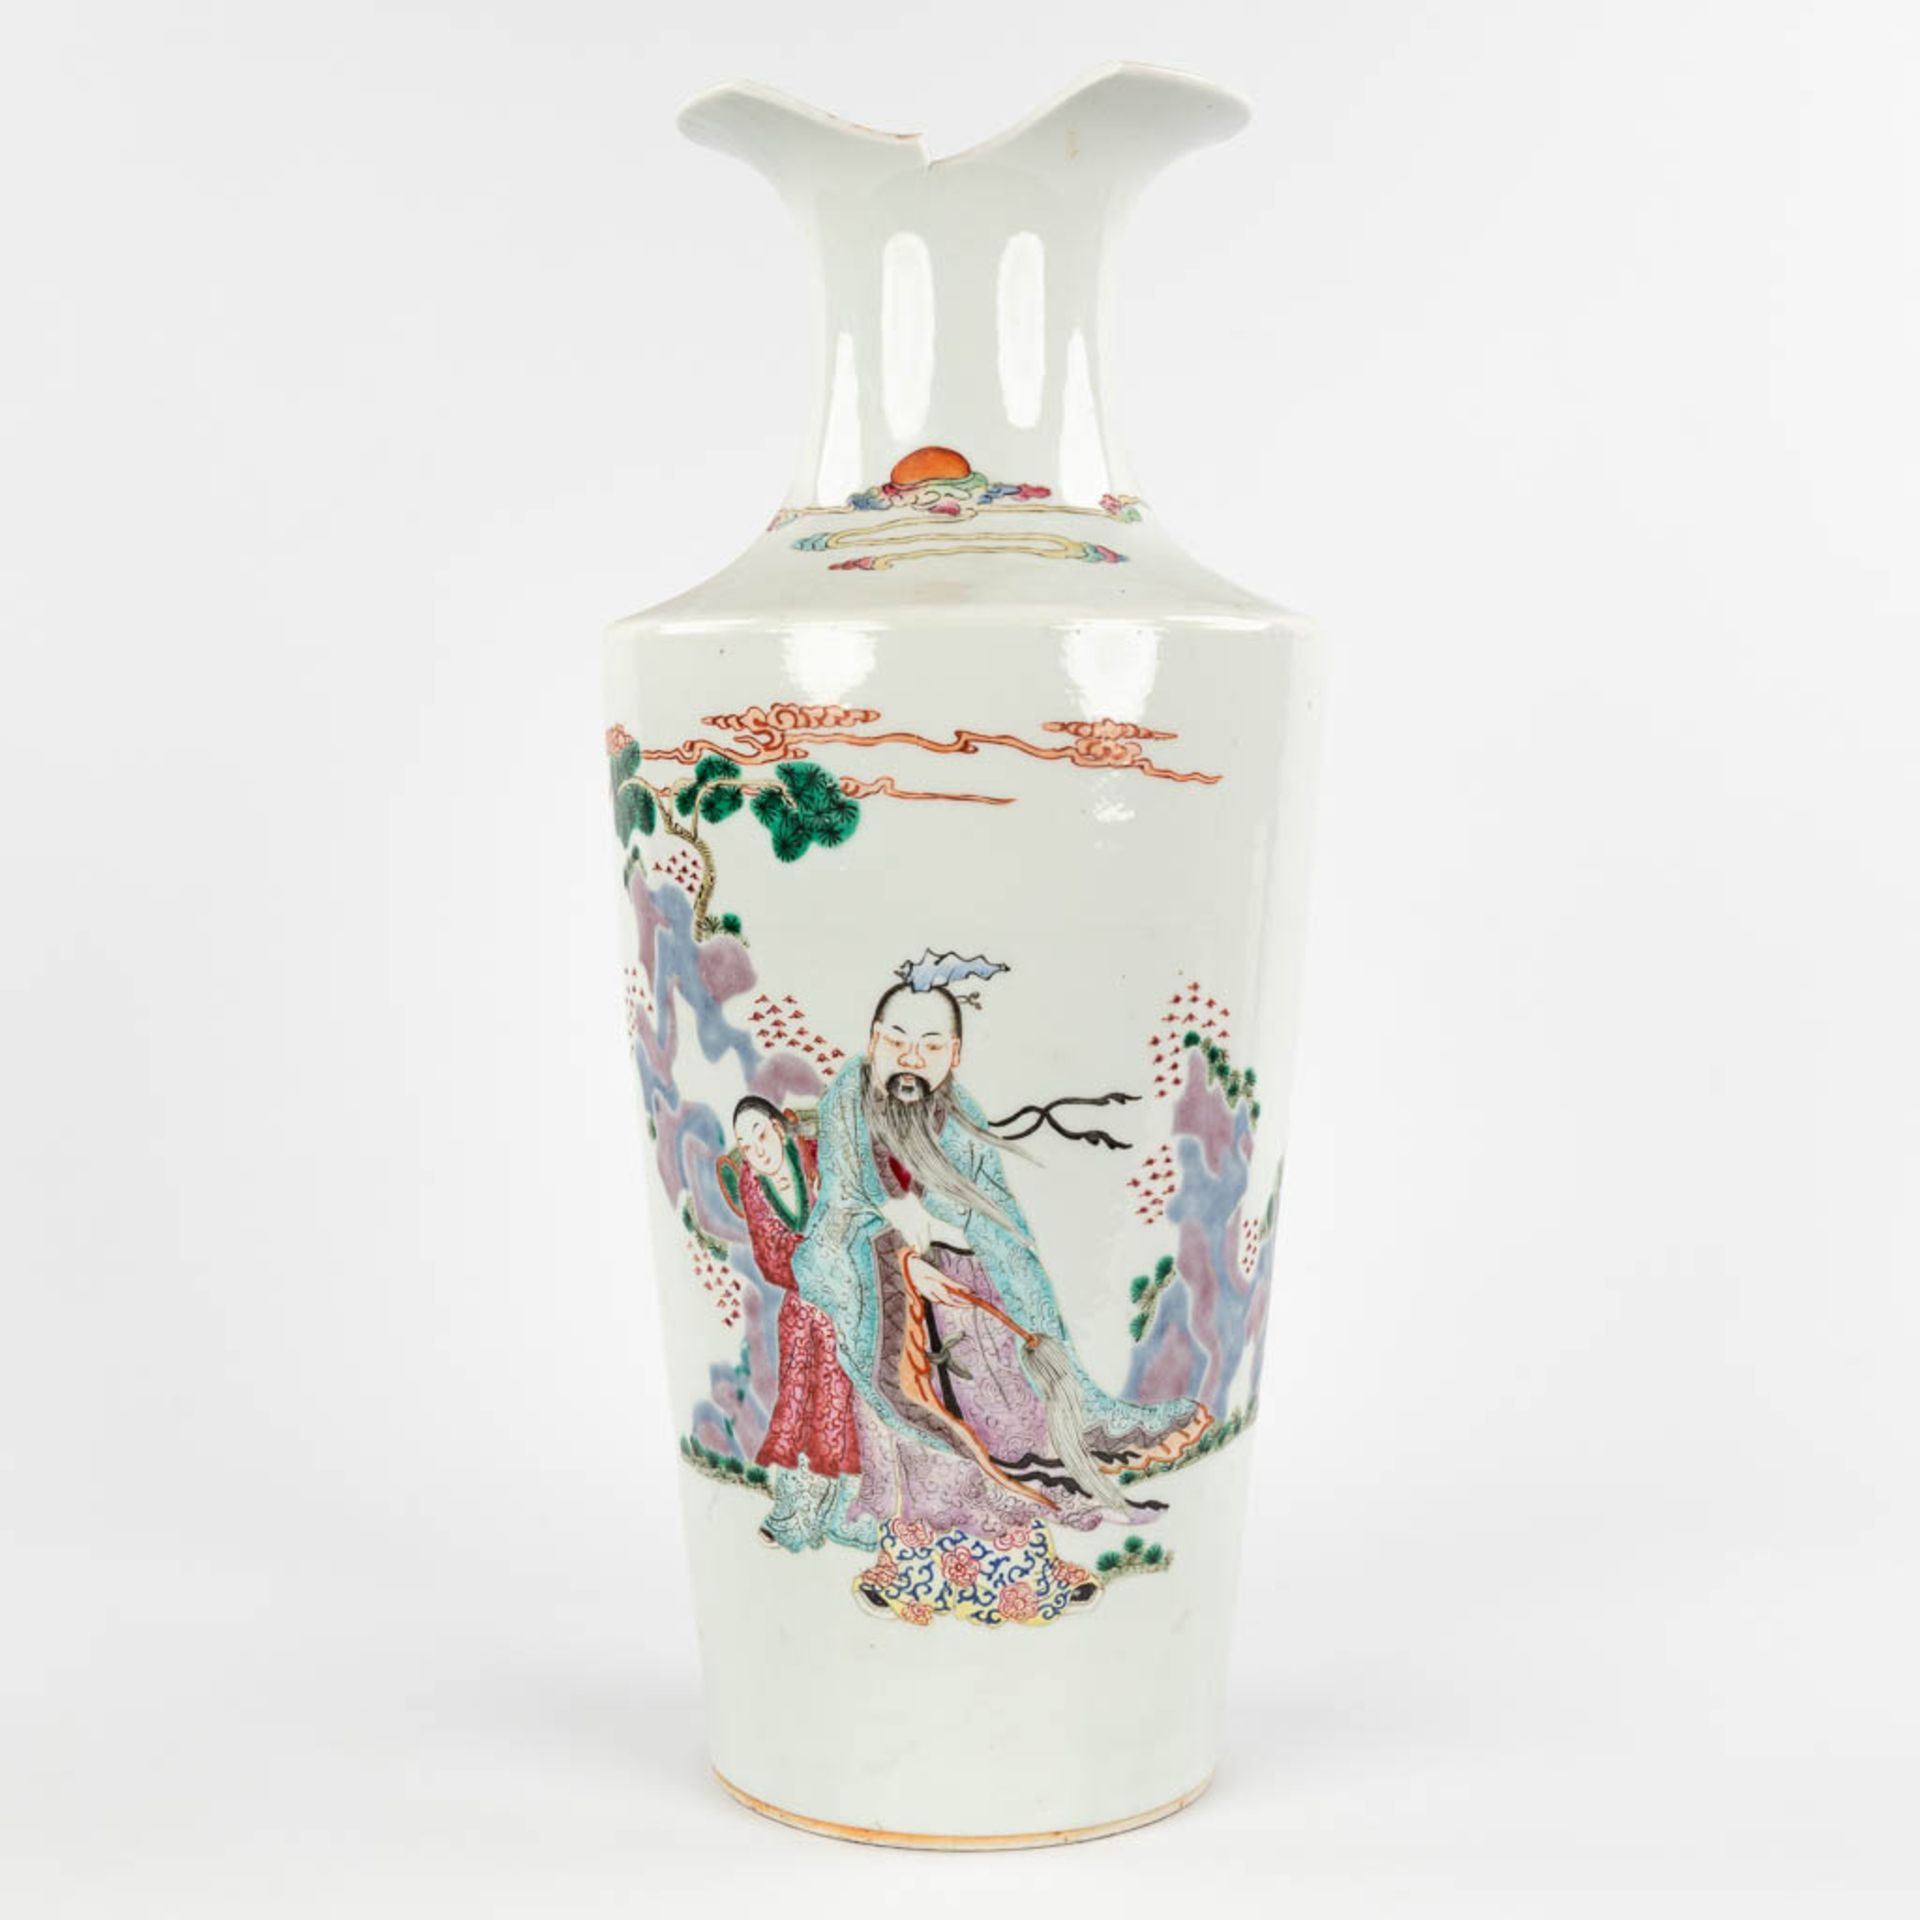 A Chinese vase, decorated with wise men or Immortals. 19th/20th C. (H:44 x D:19 cm) - Image 3 of 12